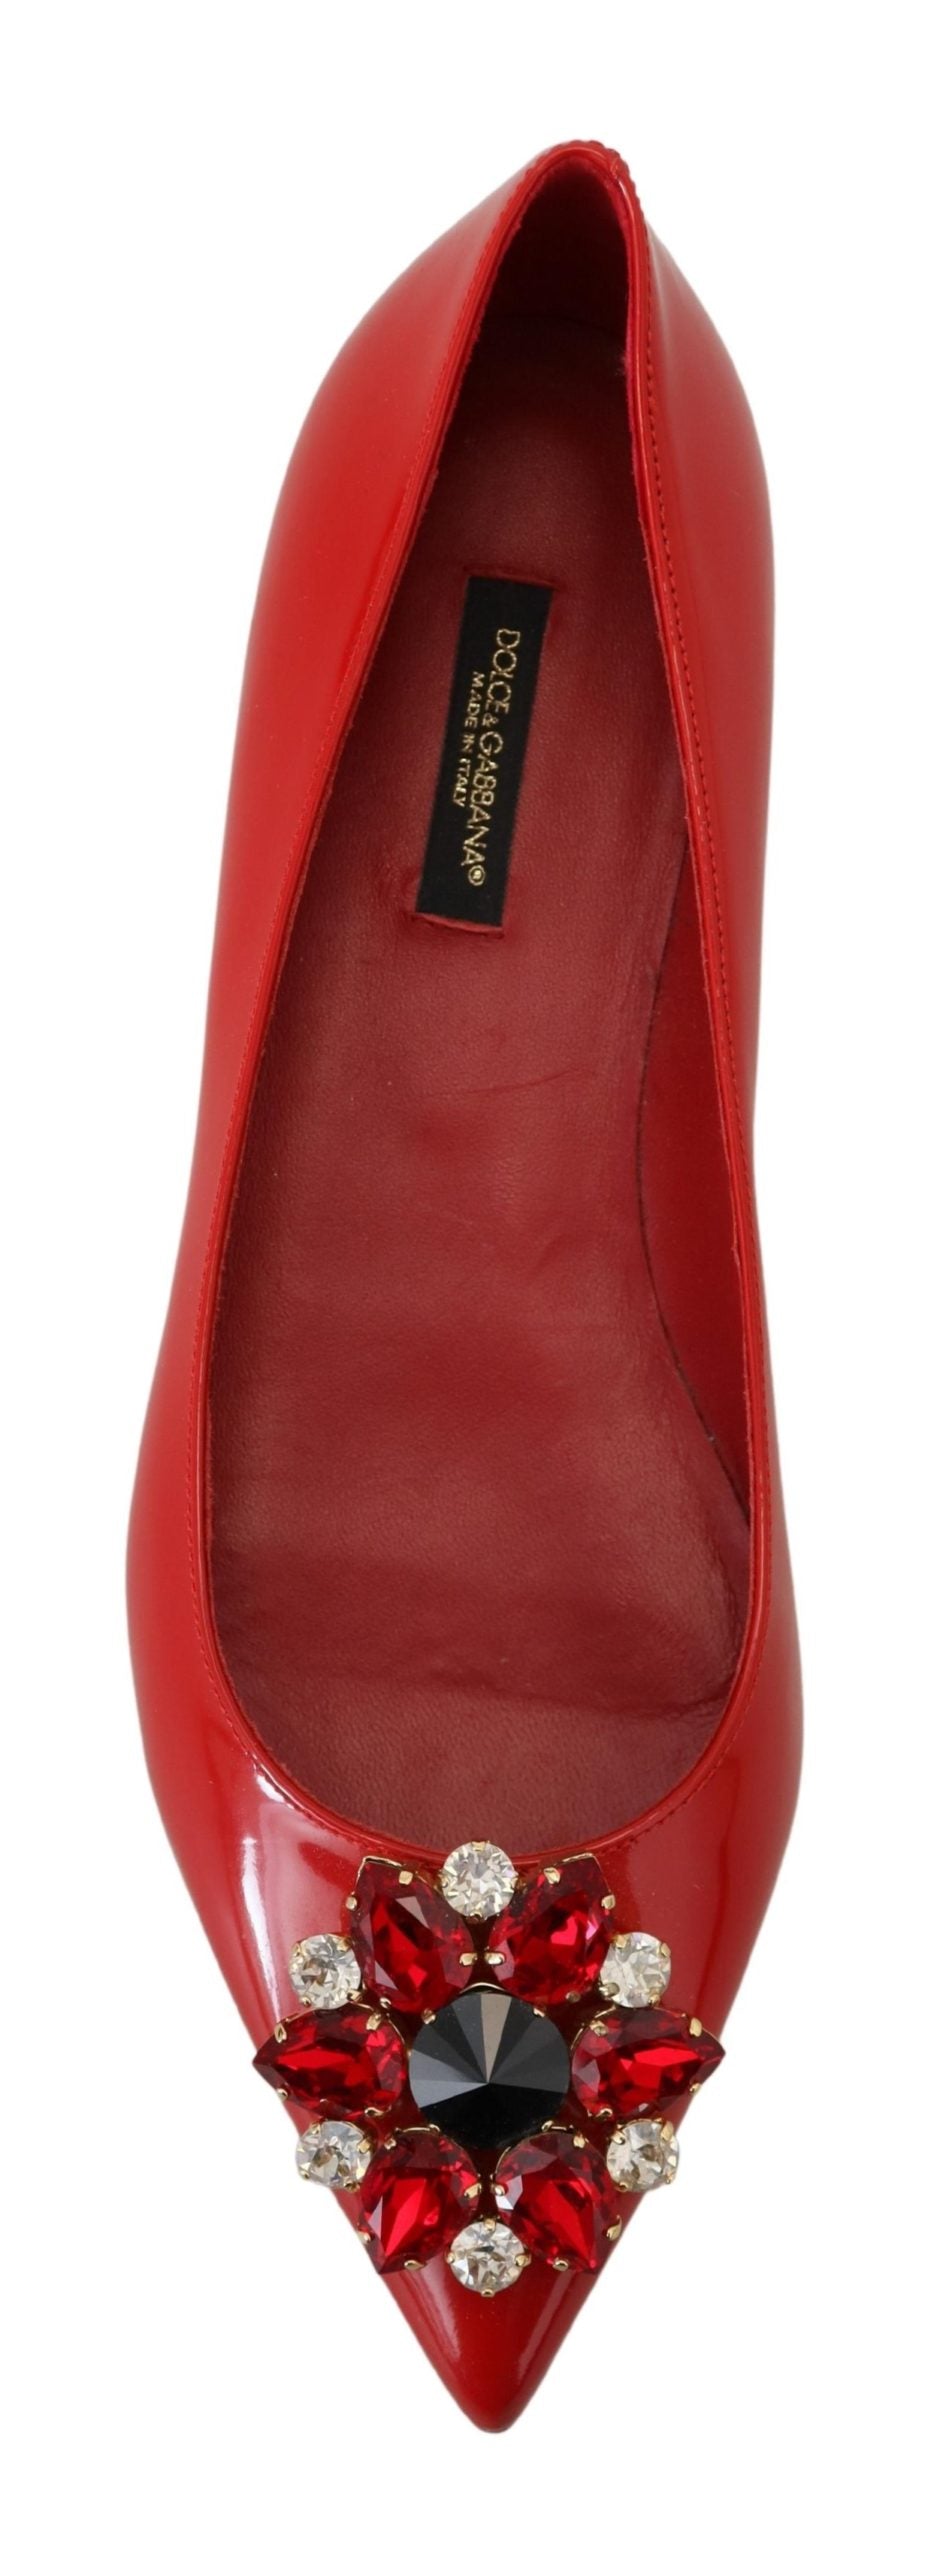 Dolce & Gabbana Red Leather Crystals Loafers Flats Shoes - DEA STILOSA MILANO